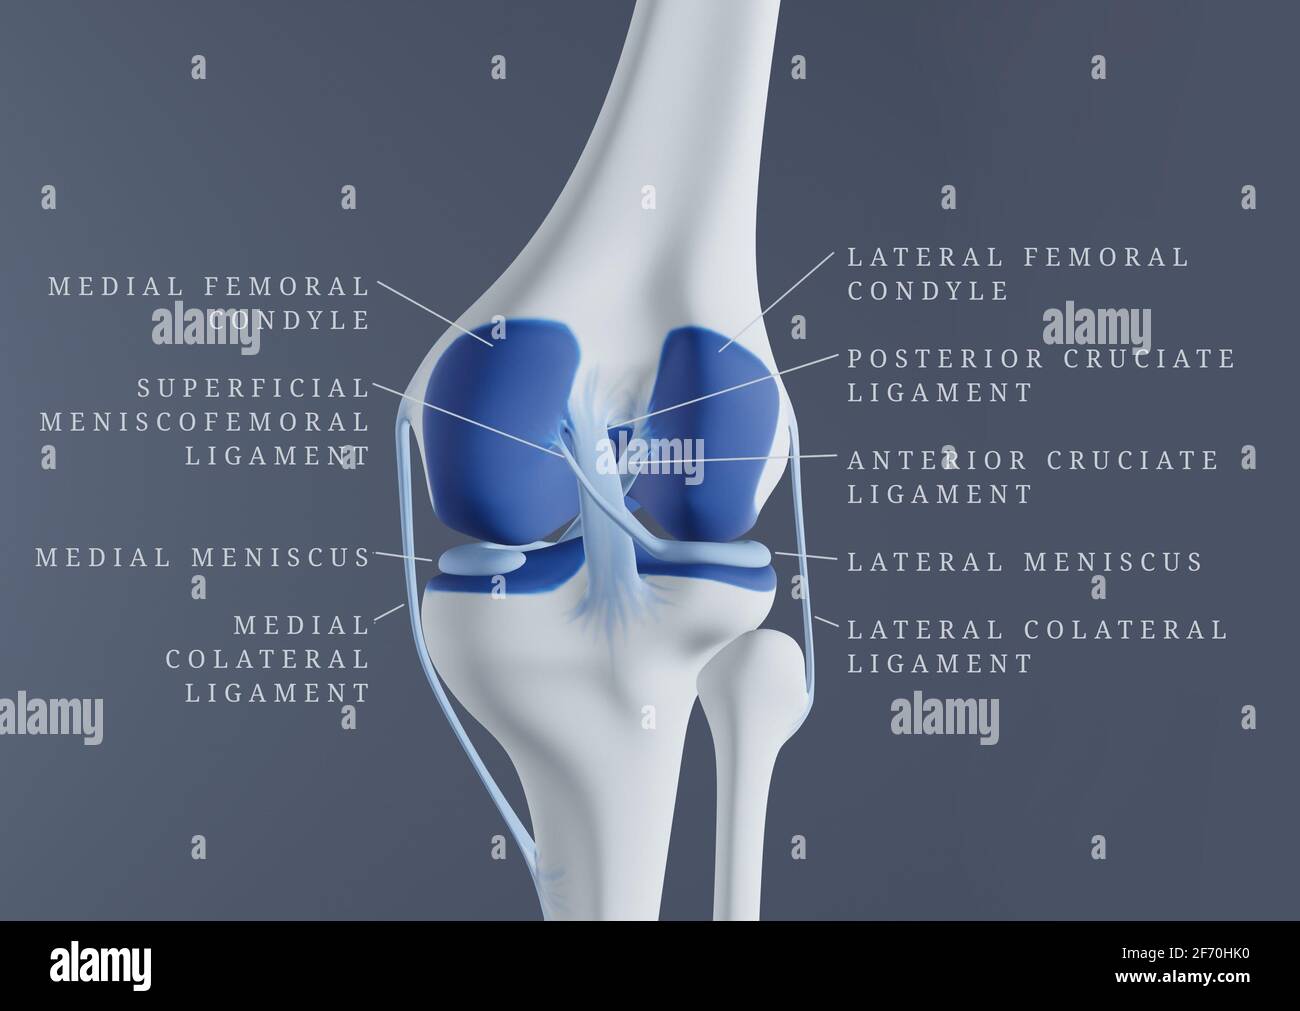 Posterior view of human knee bones, cartilage, and ligaments with labels. Stock Photo